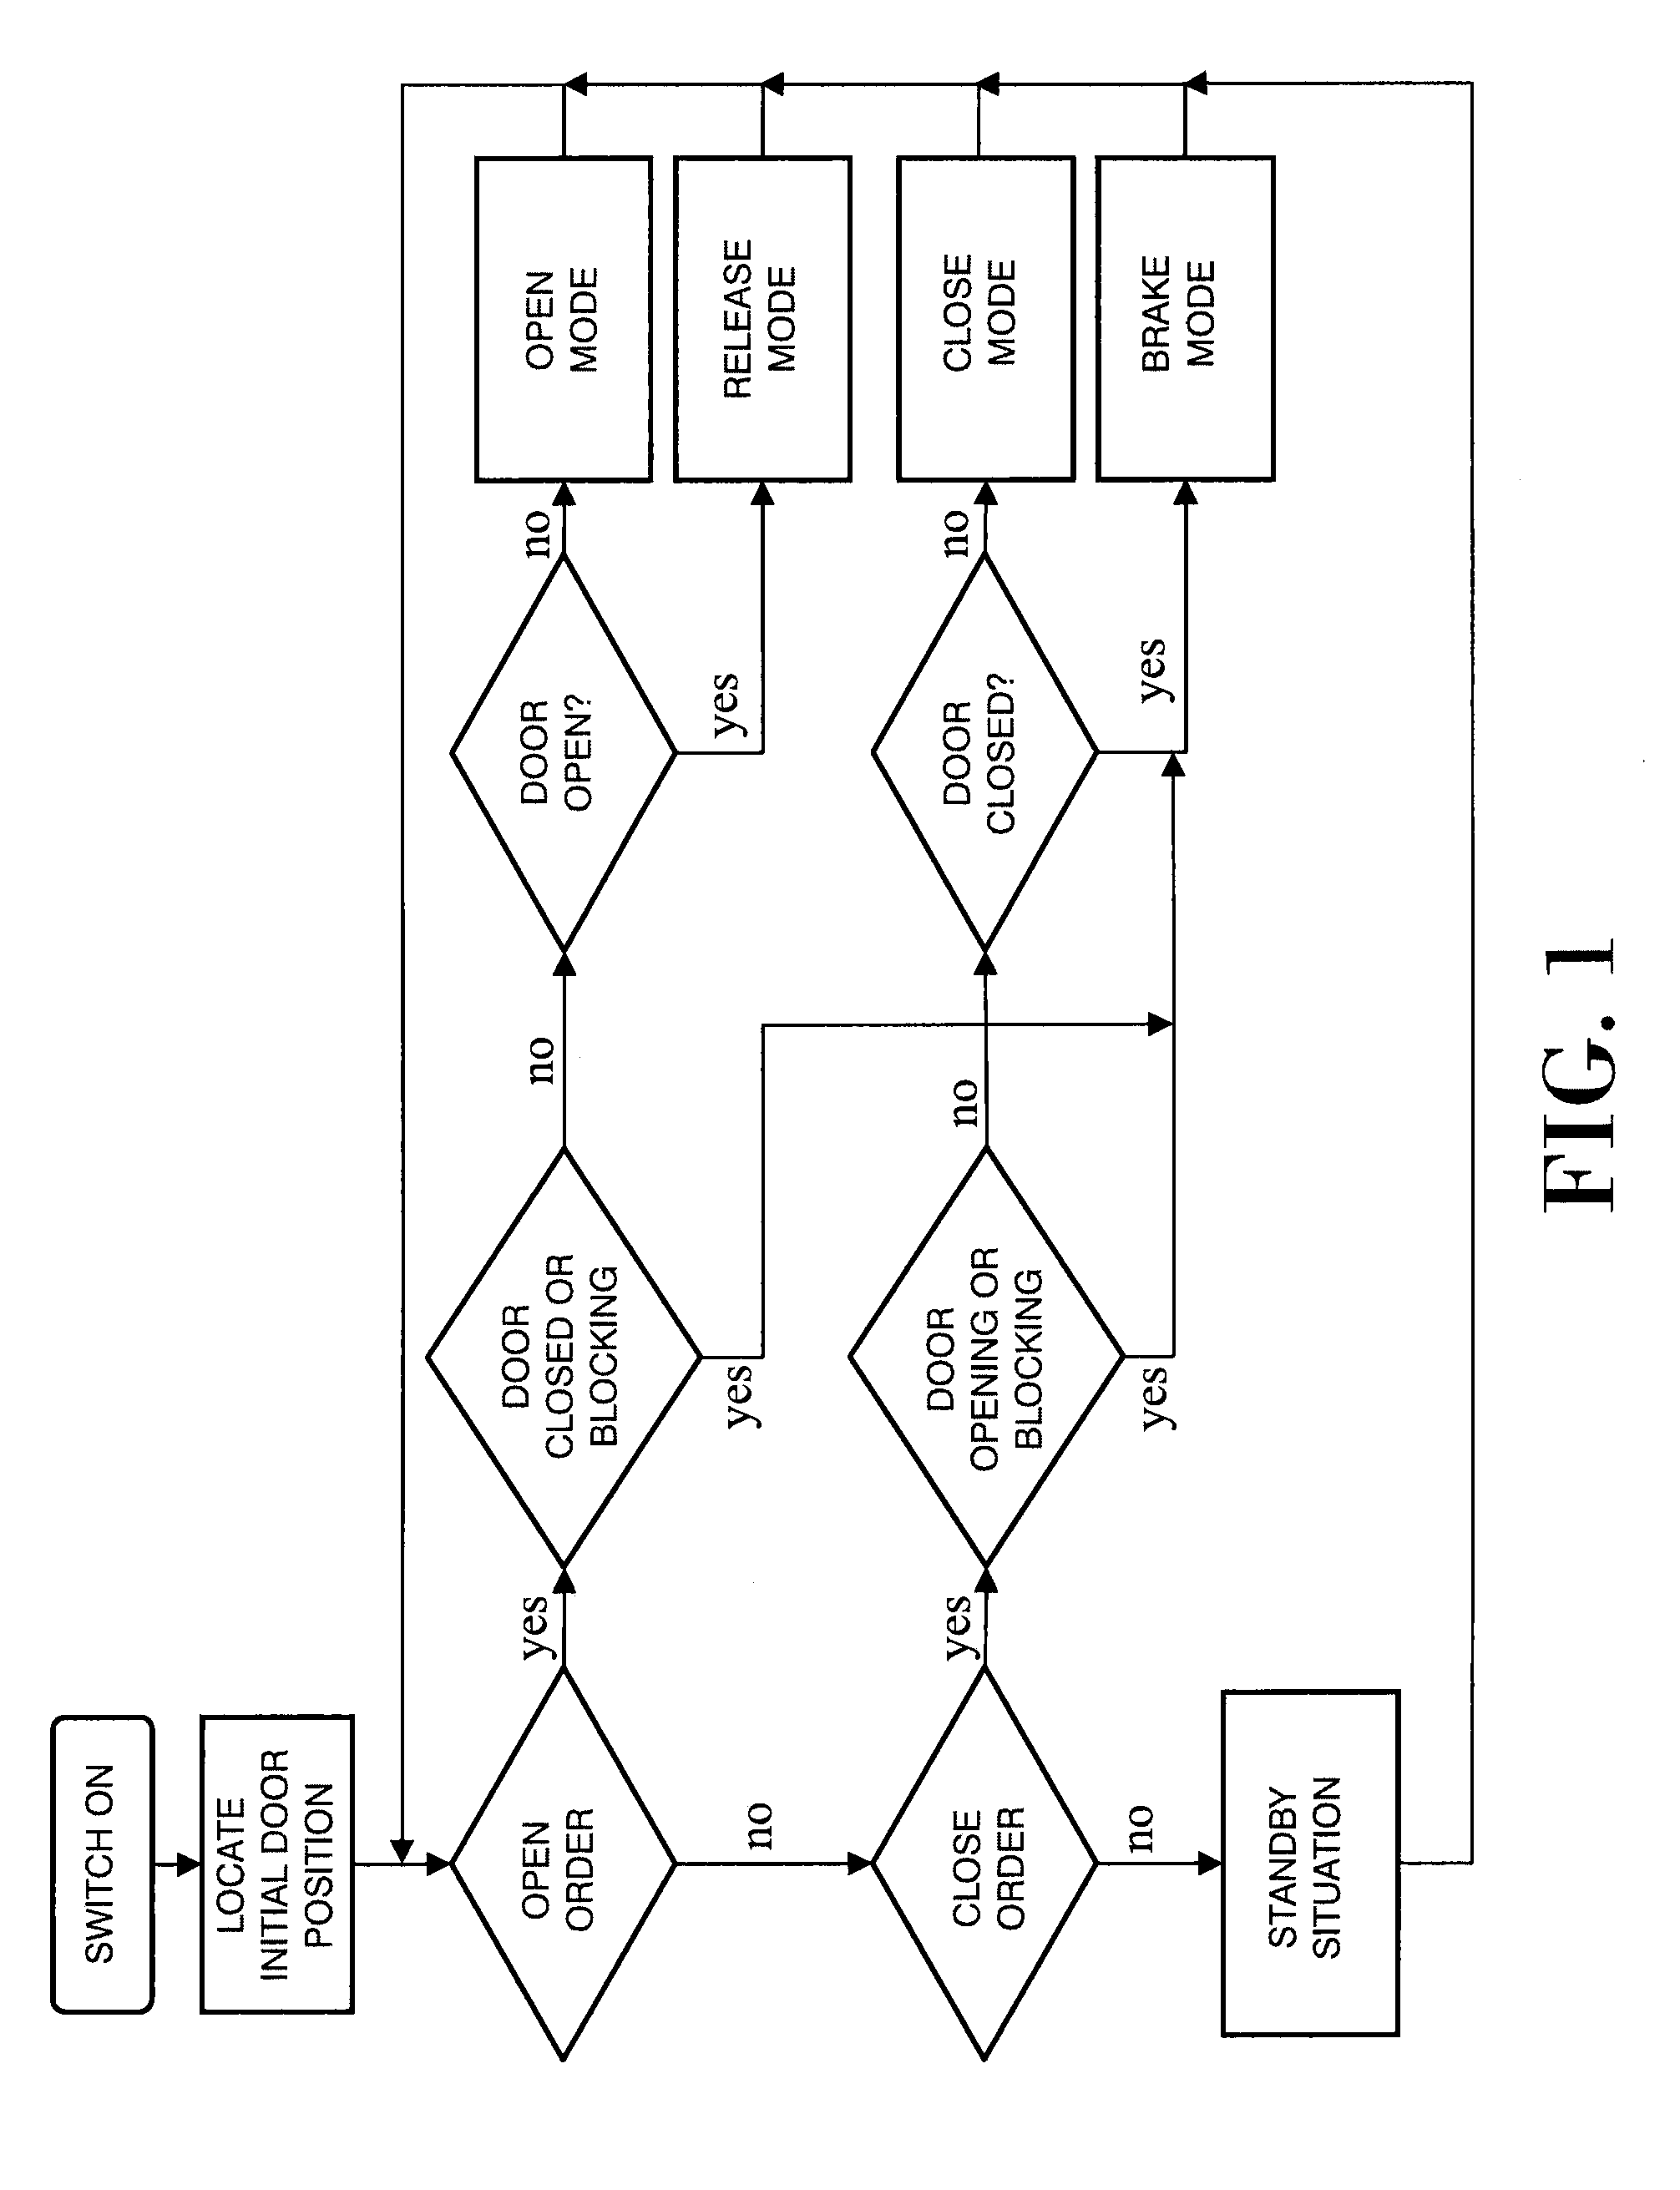 Control system for train doors and actuation method based on said system